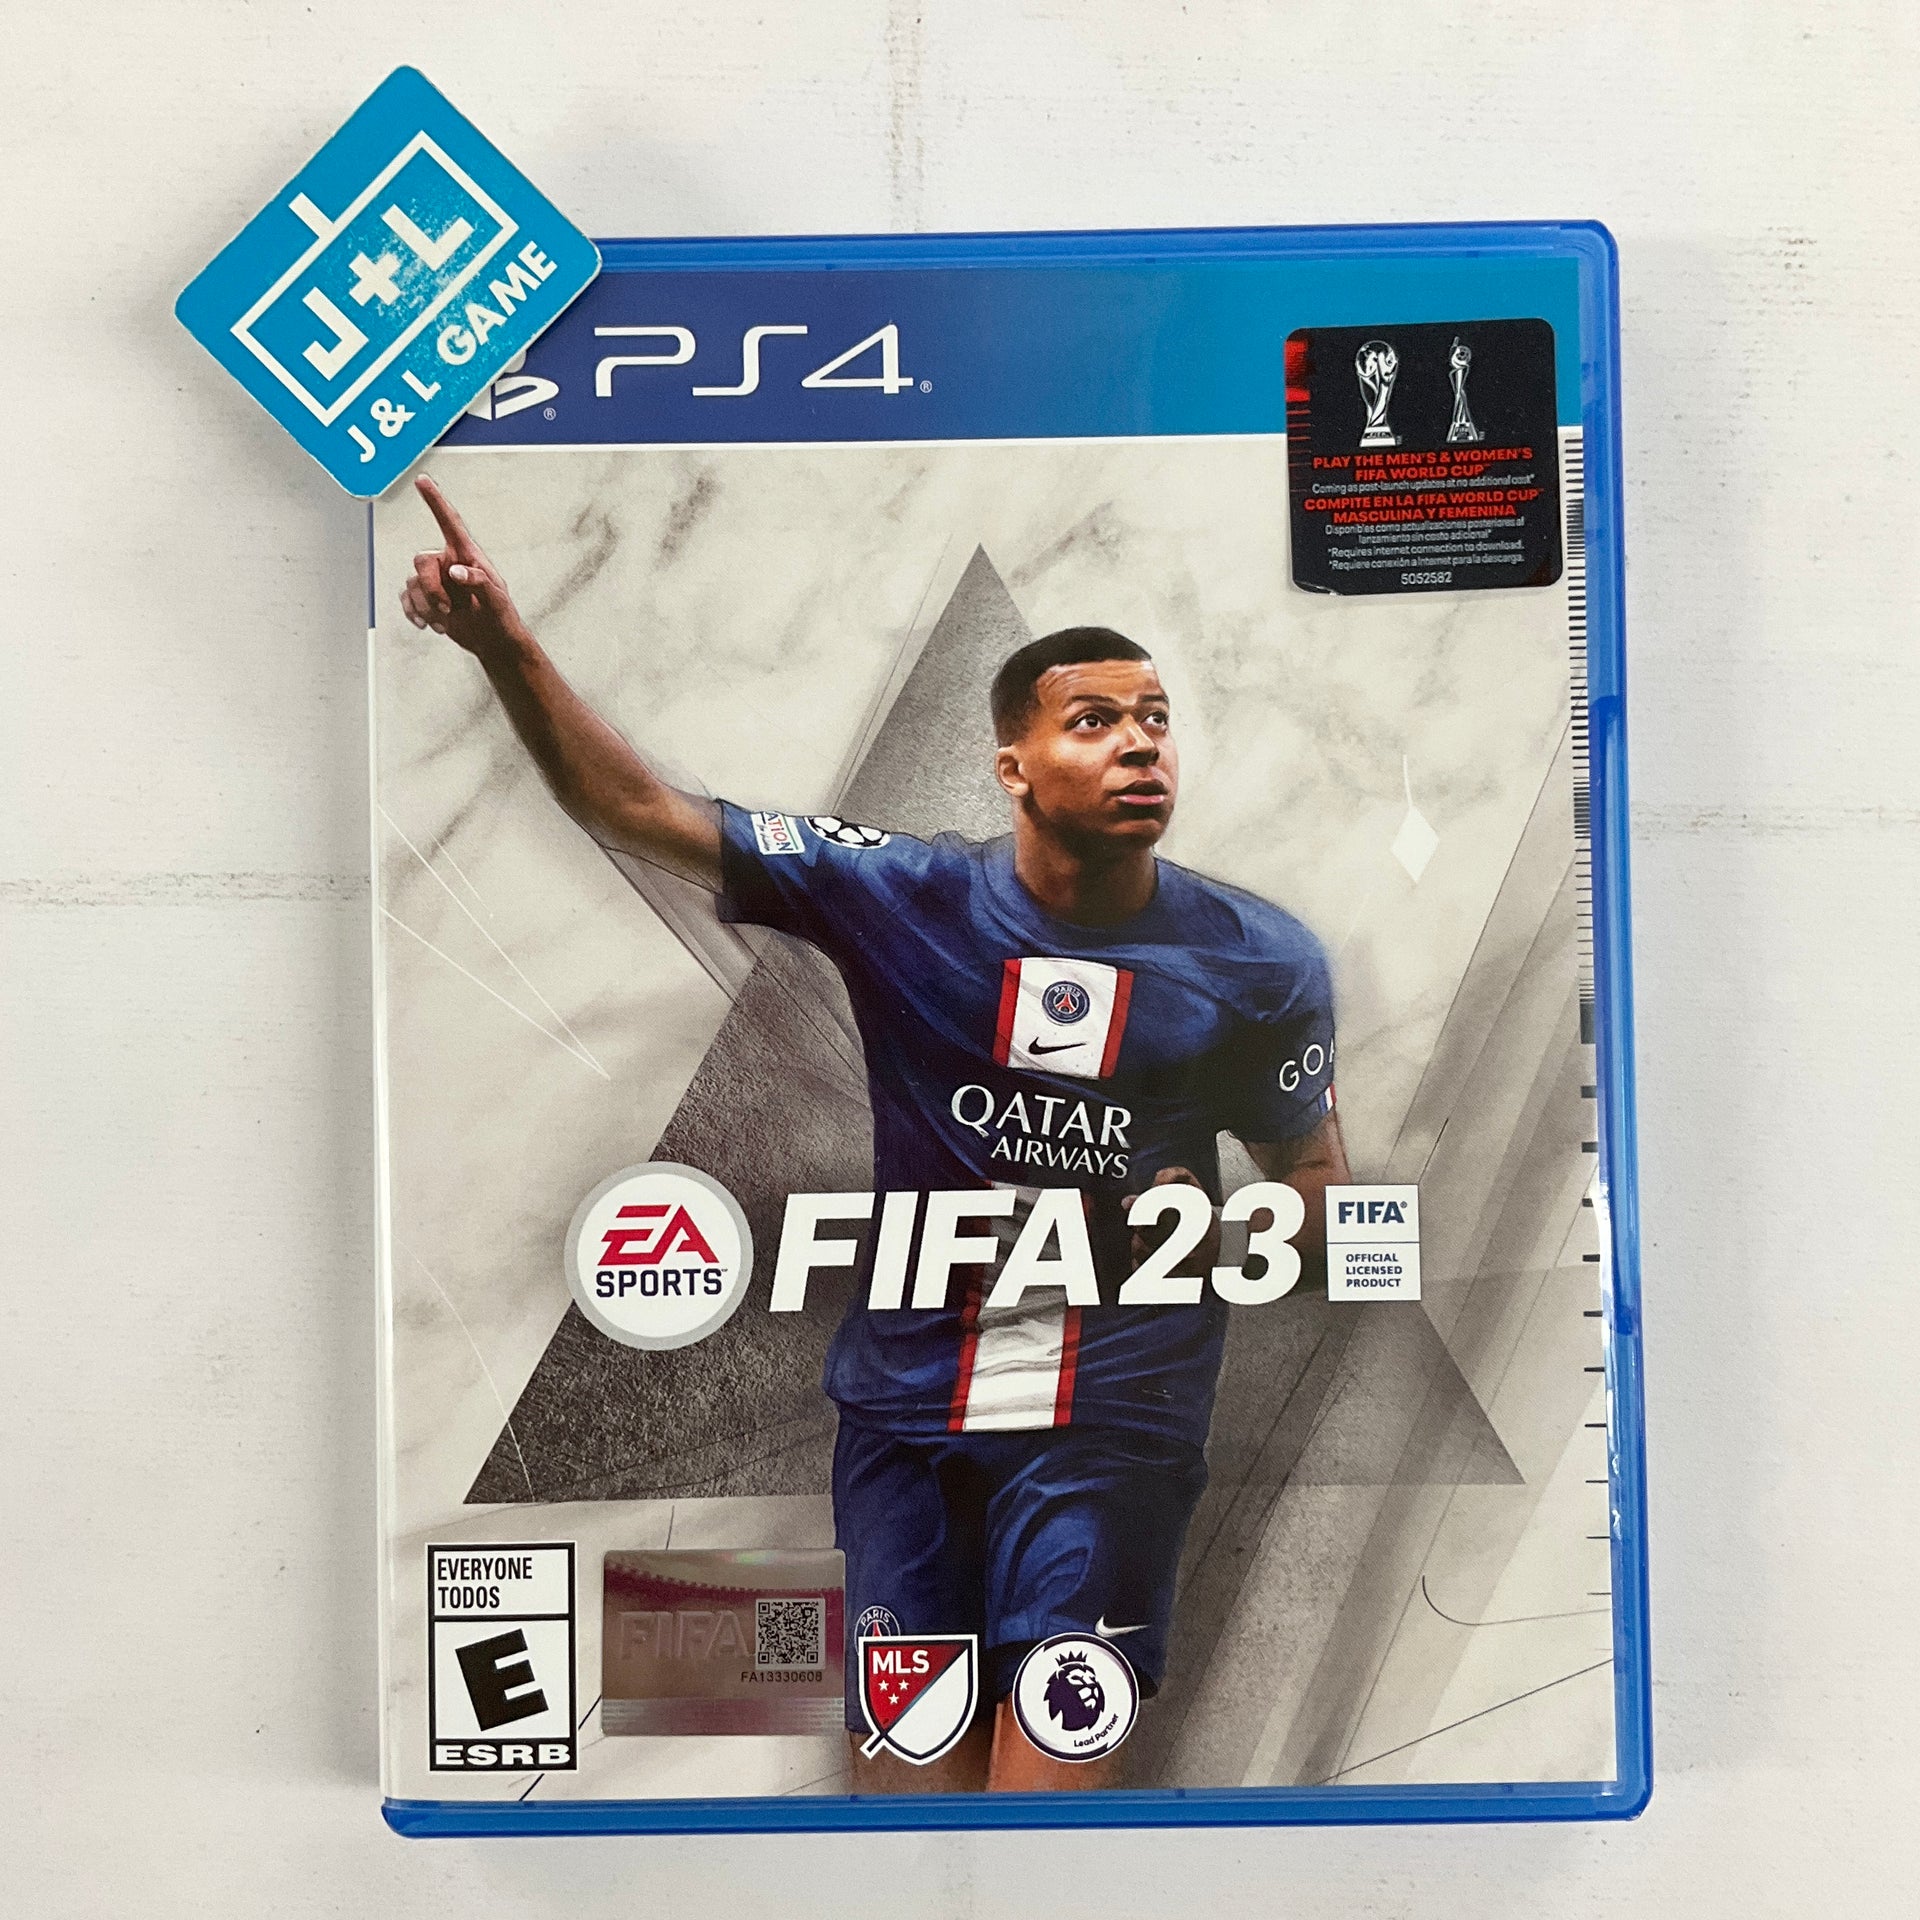 FIFA 23 - (PS4) PlayStation 4 [UNBOXING]